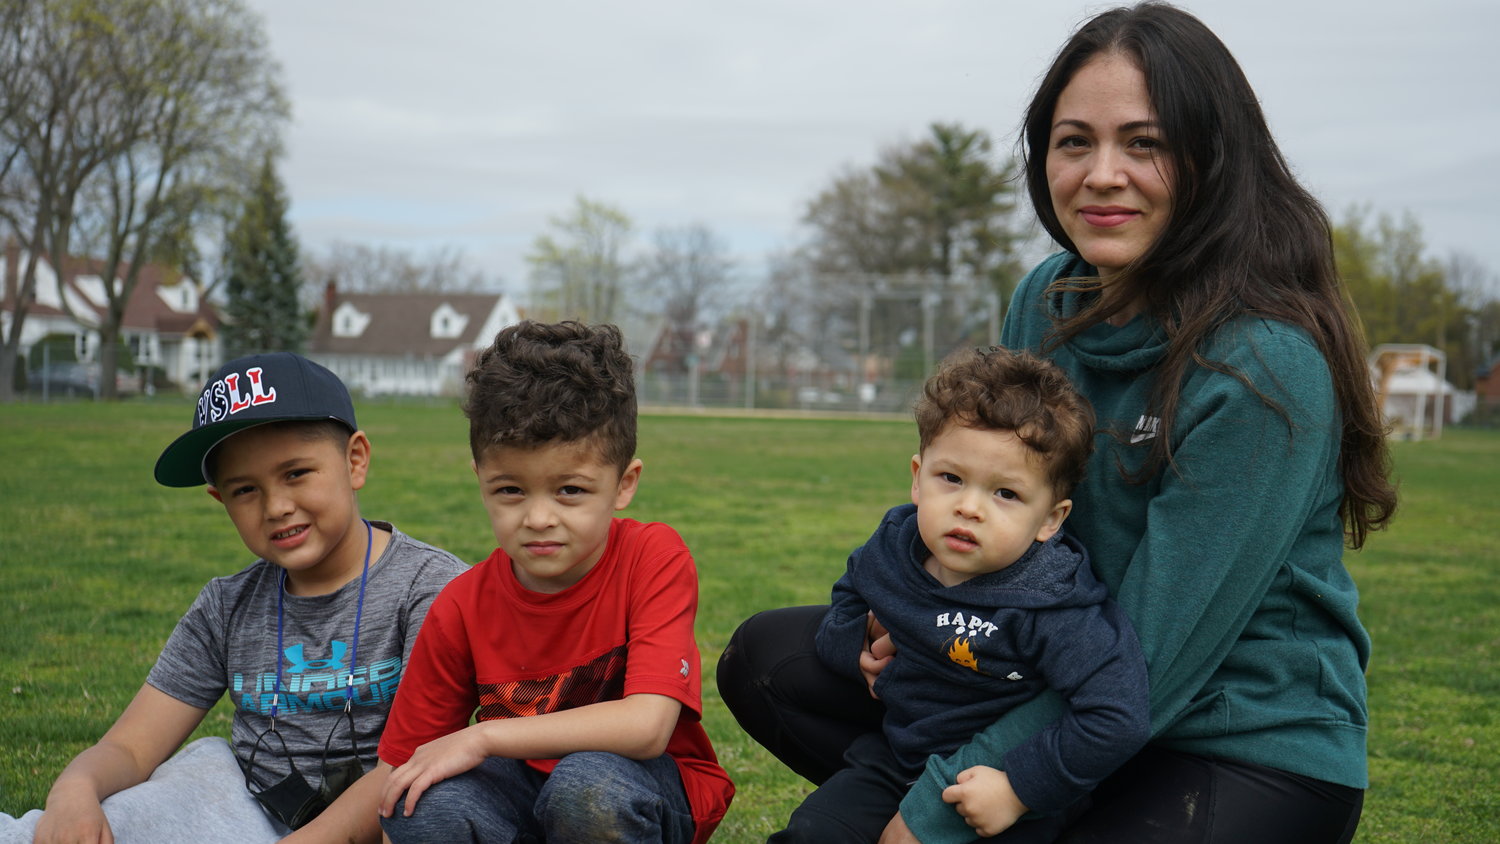 District 13 parent Jessica Ramirez with her sons Antonio, 8, Luca, 6, and Ryan 2. She said she looked forward to sending Ryan to the district’s universal pre-K program if it is implemented within the next two years.